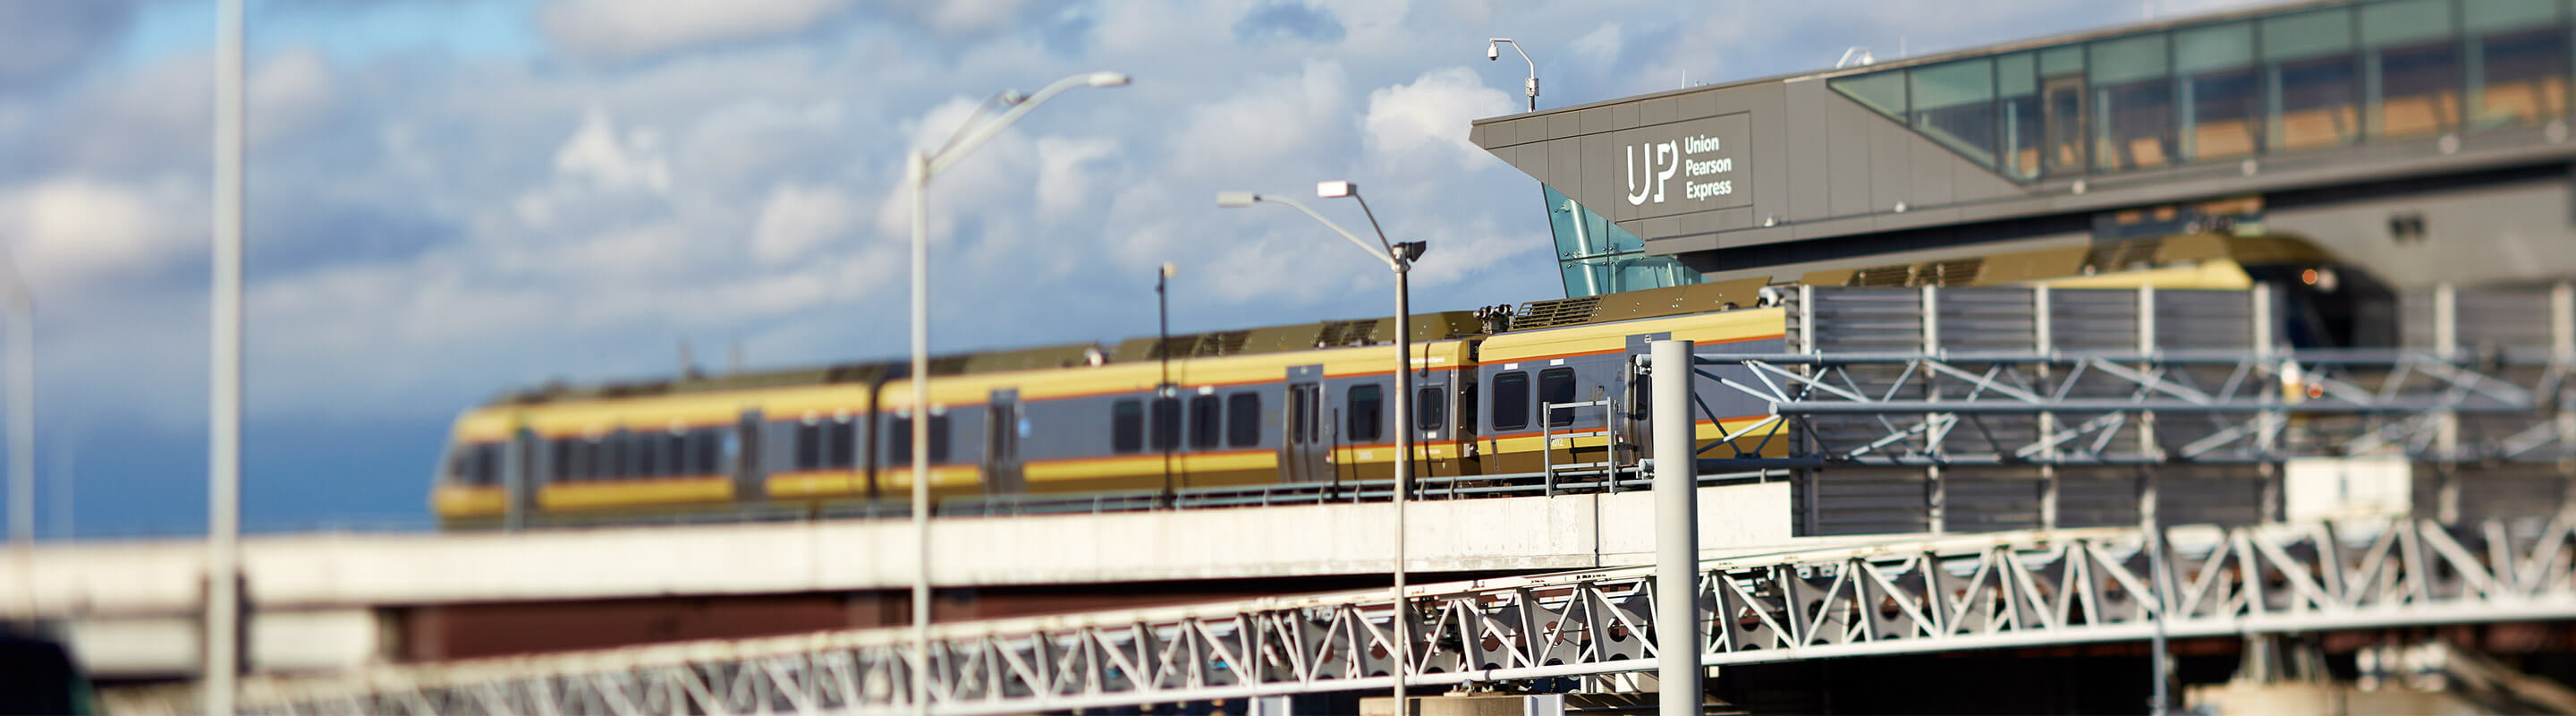 UP Express train arriving at Pearson